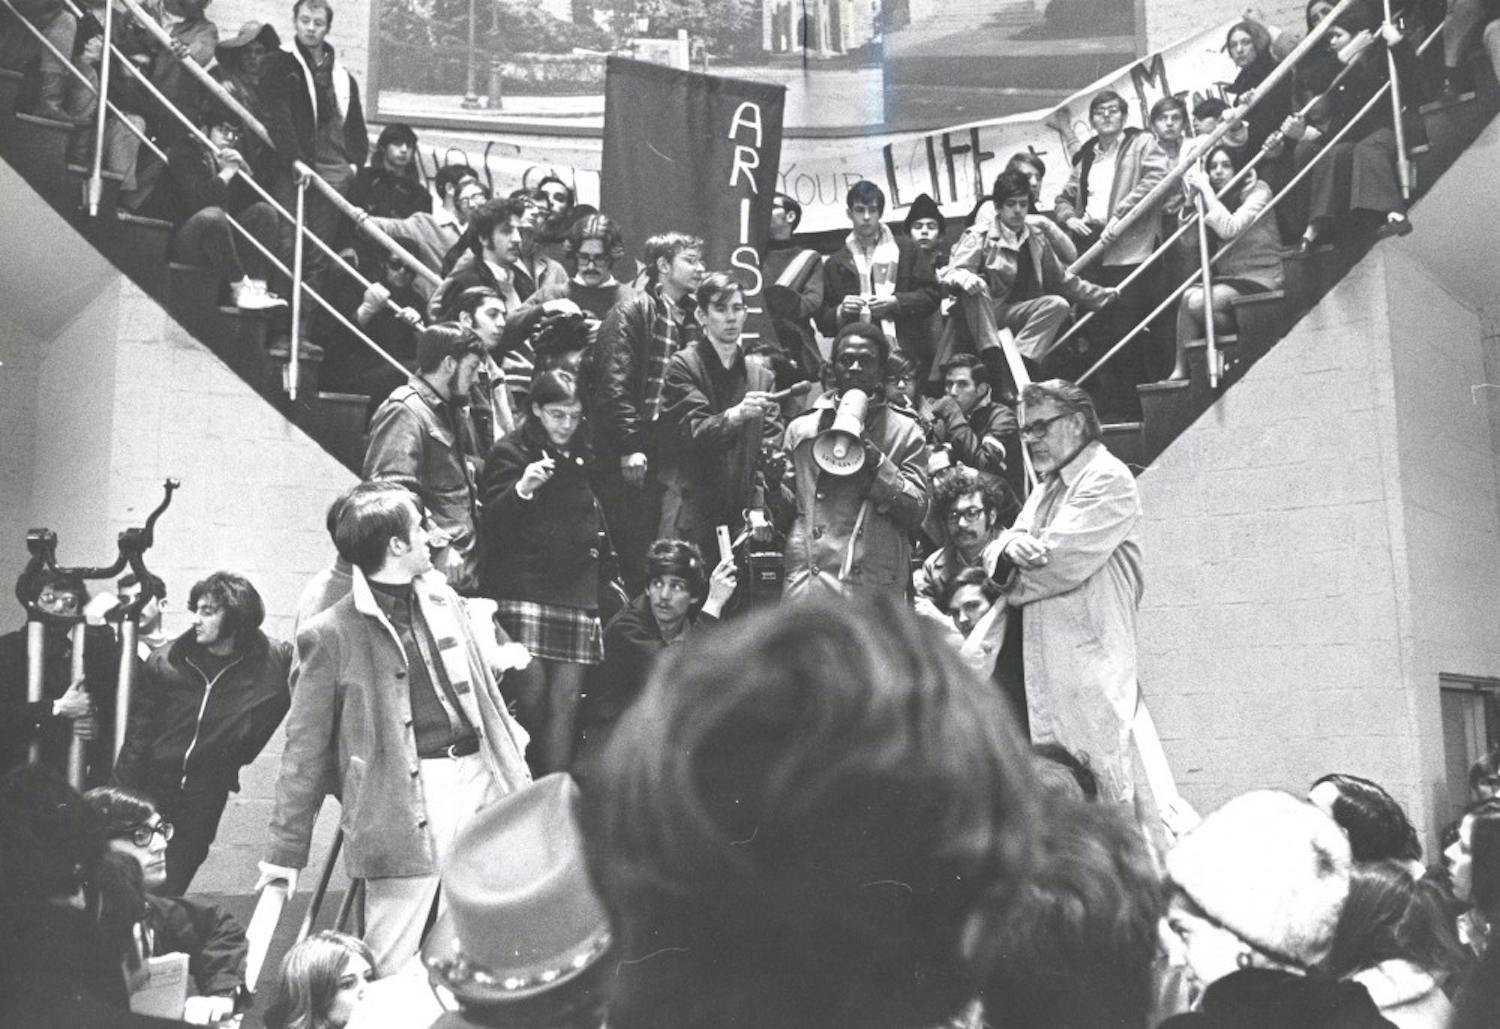 In 1969, students gathered at the McKinley building for an OASATAU rally following the University's prohibition of Dick Gregory, a black Civil Rights activist and presidential candidate, to hold an "inaugural" gala at AU.